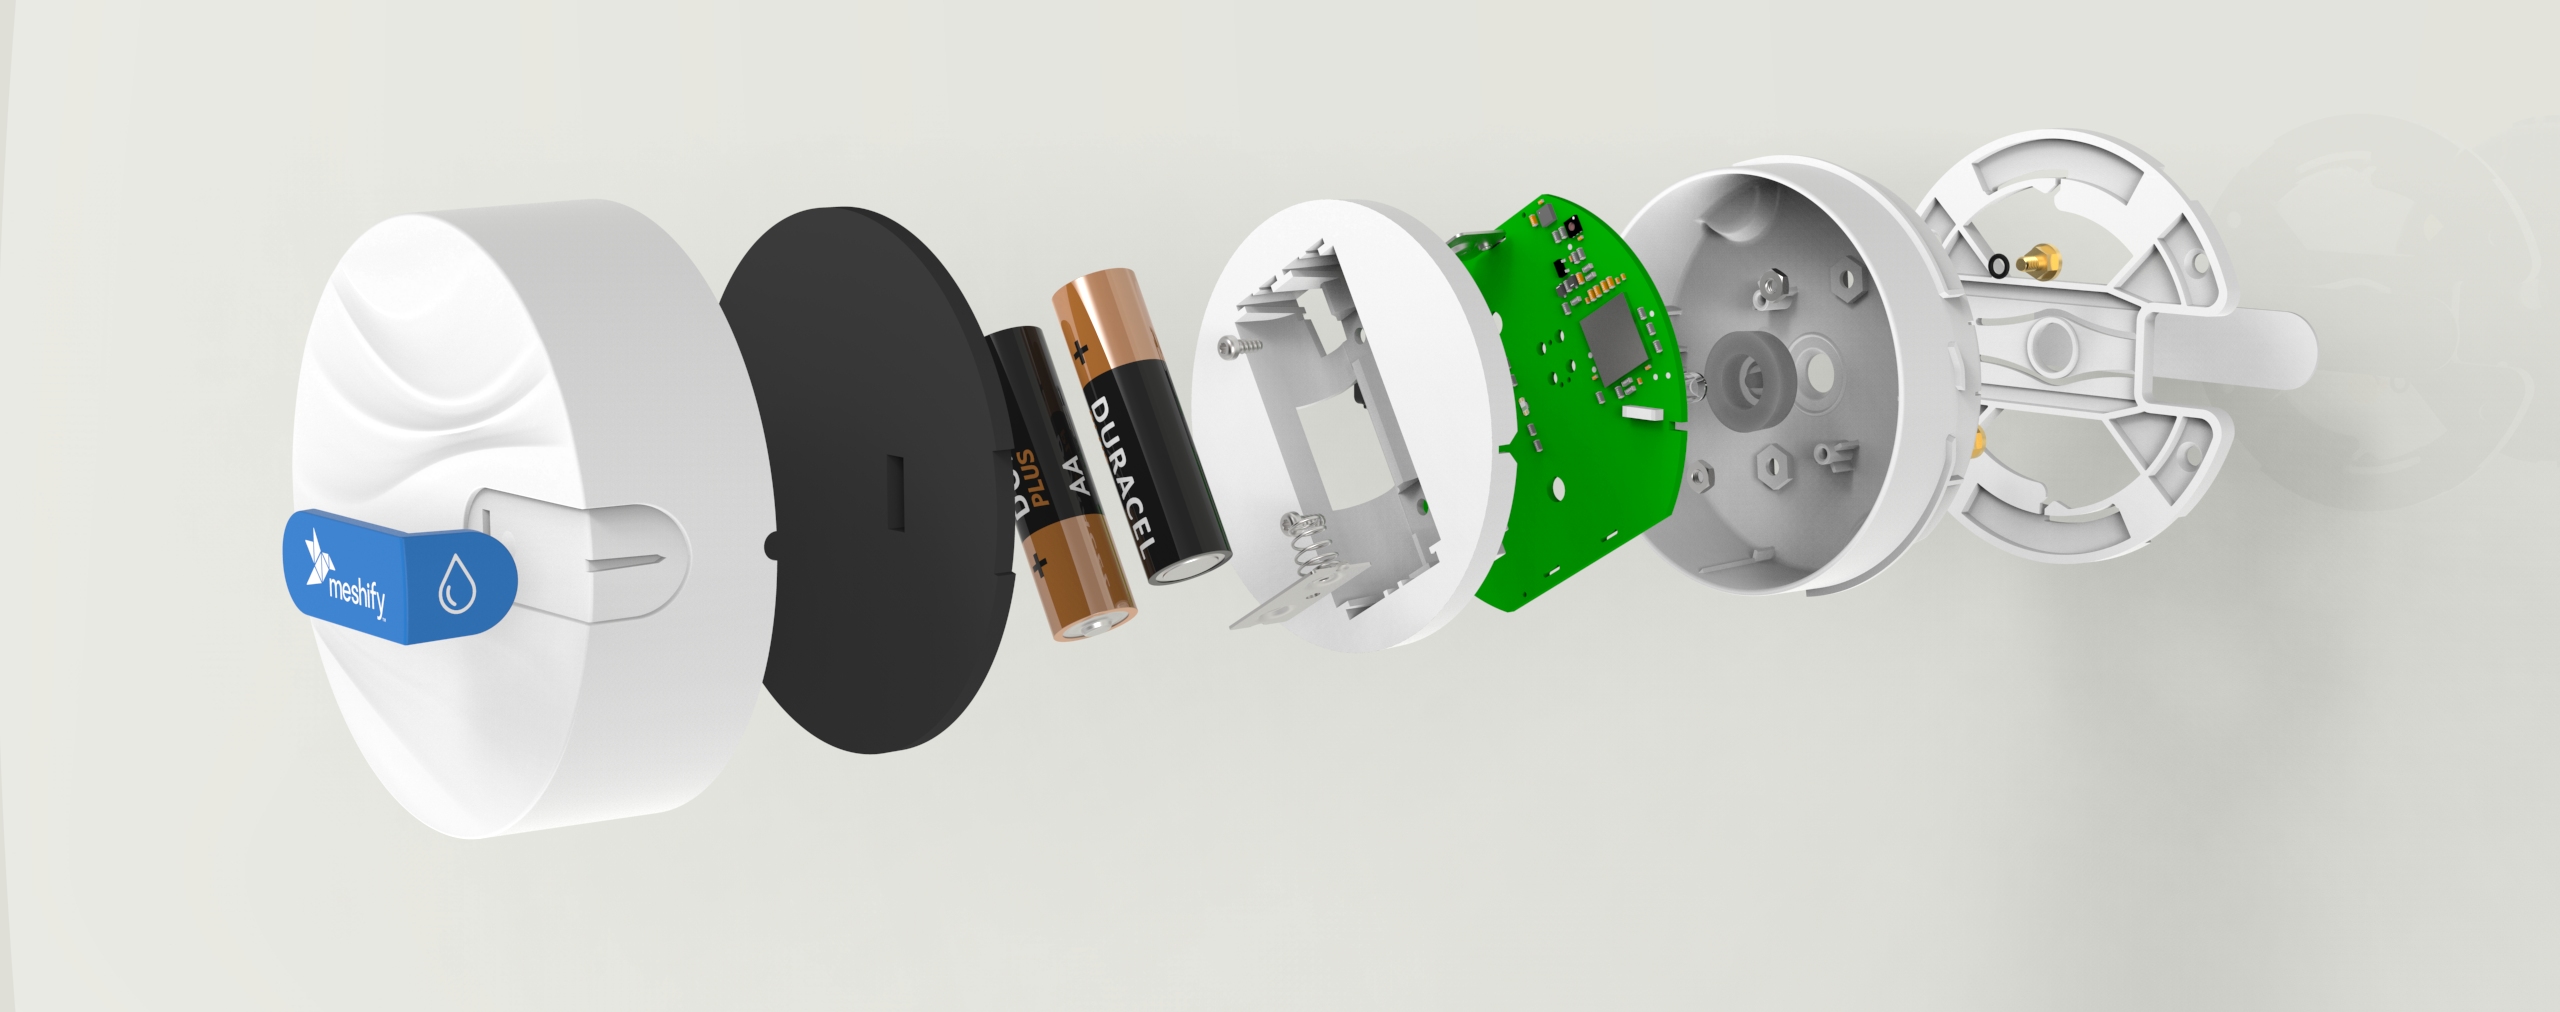 A rendering of the Meshify Defender Sensor torn down to show the interior breakdown of the puck.